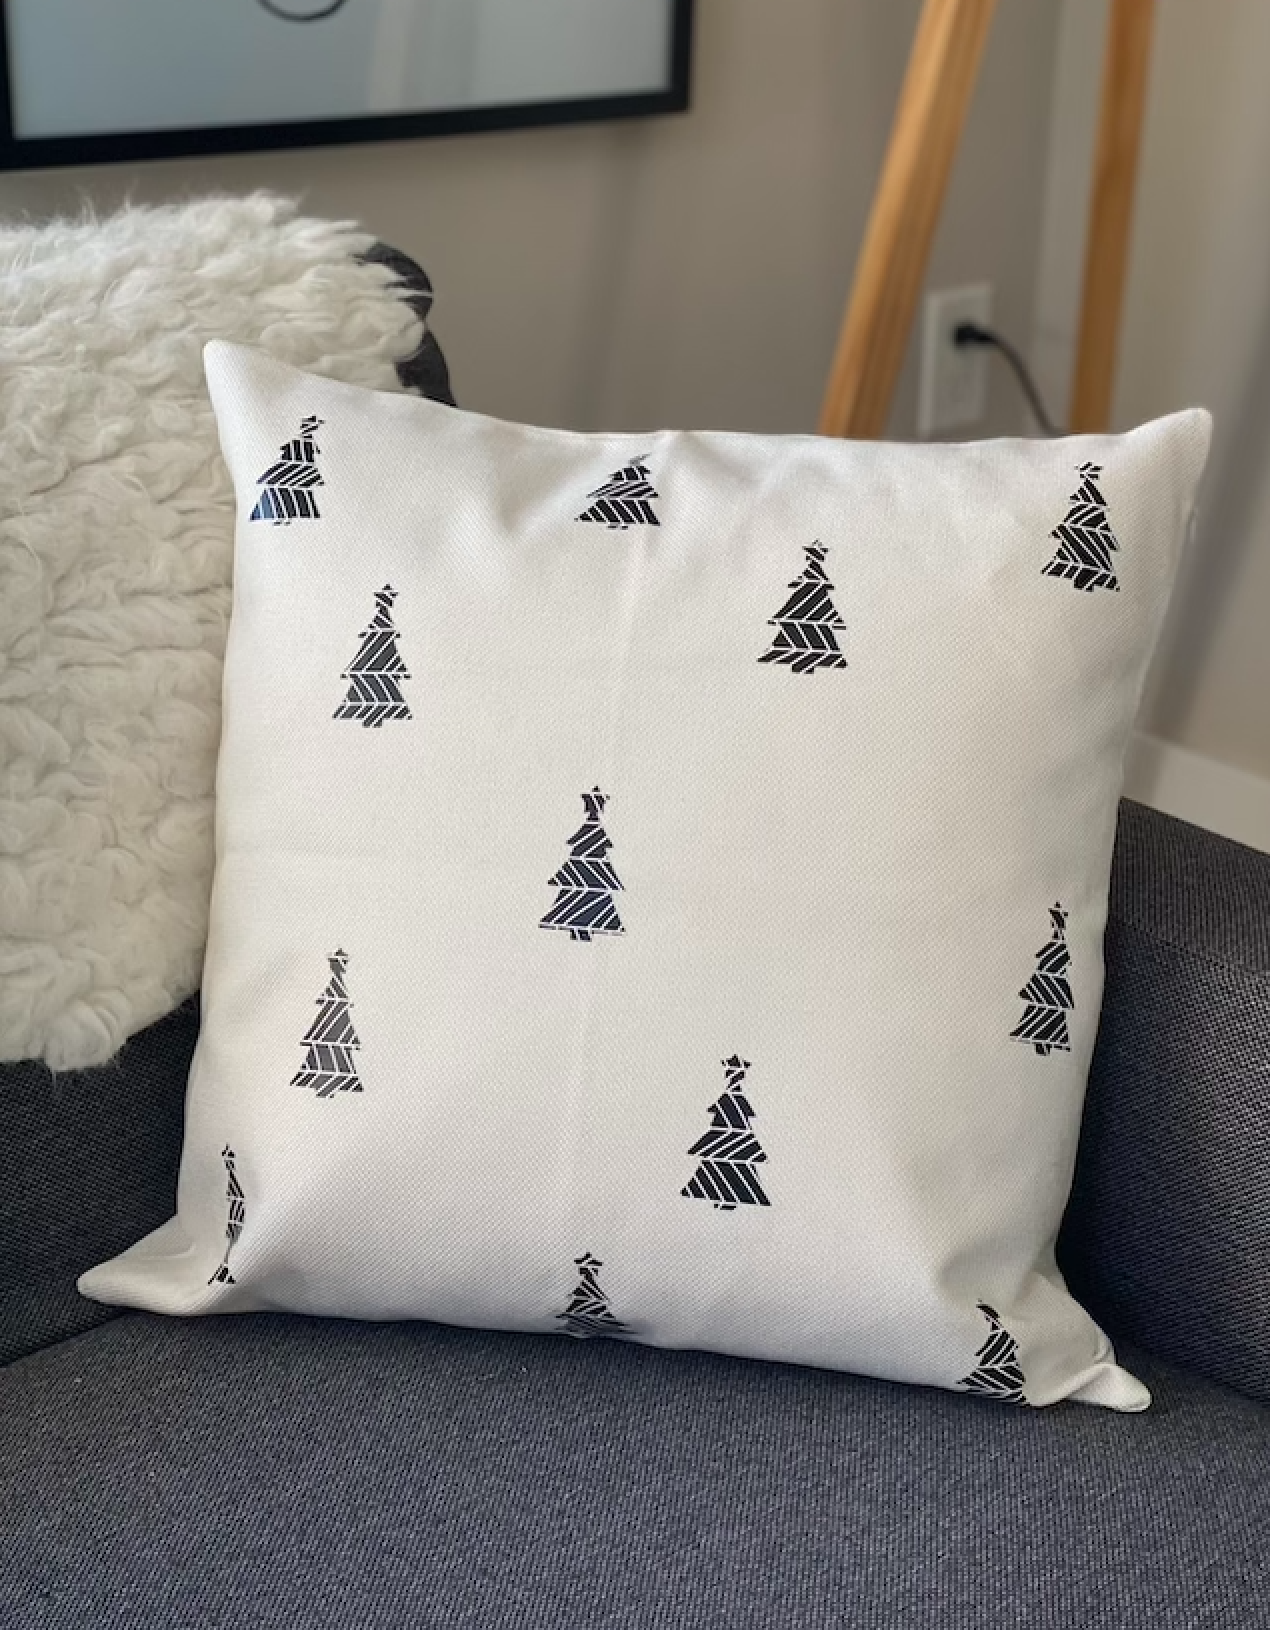 https://www.onesmileymonkey.com/wp-content/uploads/2020/11/Personalized-Minimalist-Scandinavian-Style-Holiday-Pillow-Gift-with-Cricut10.png